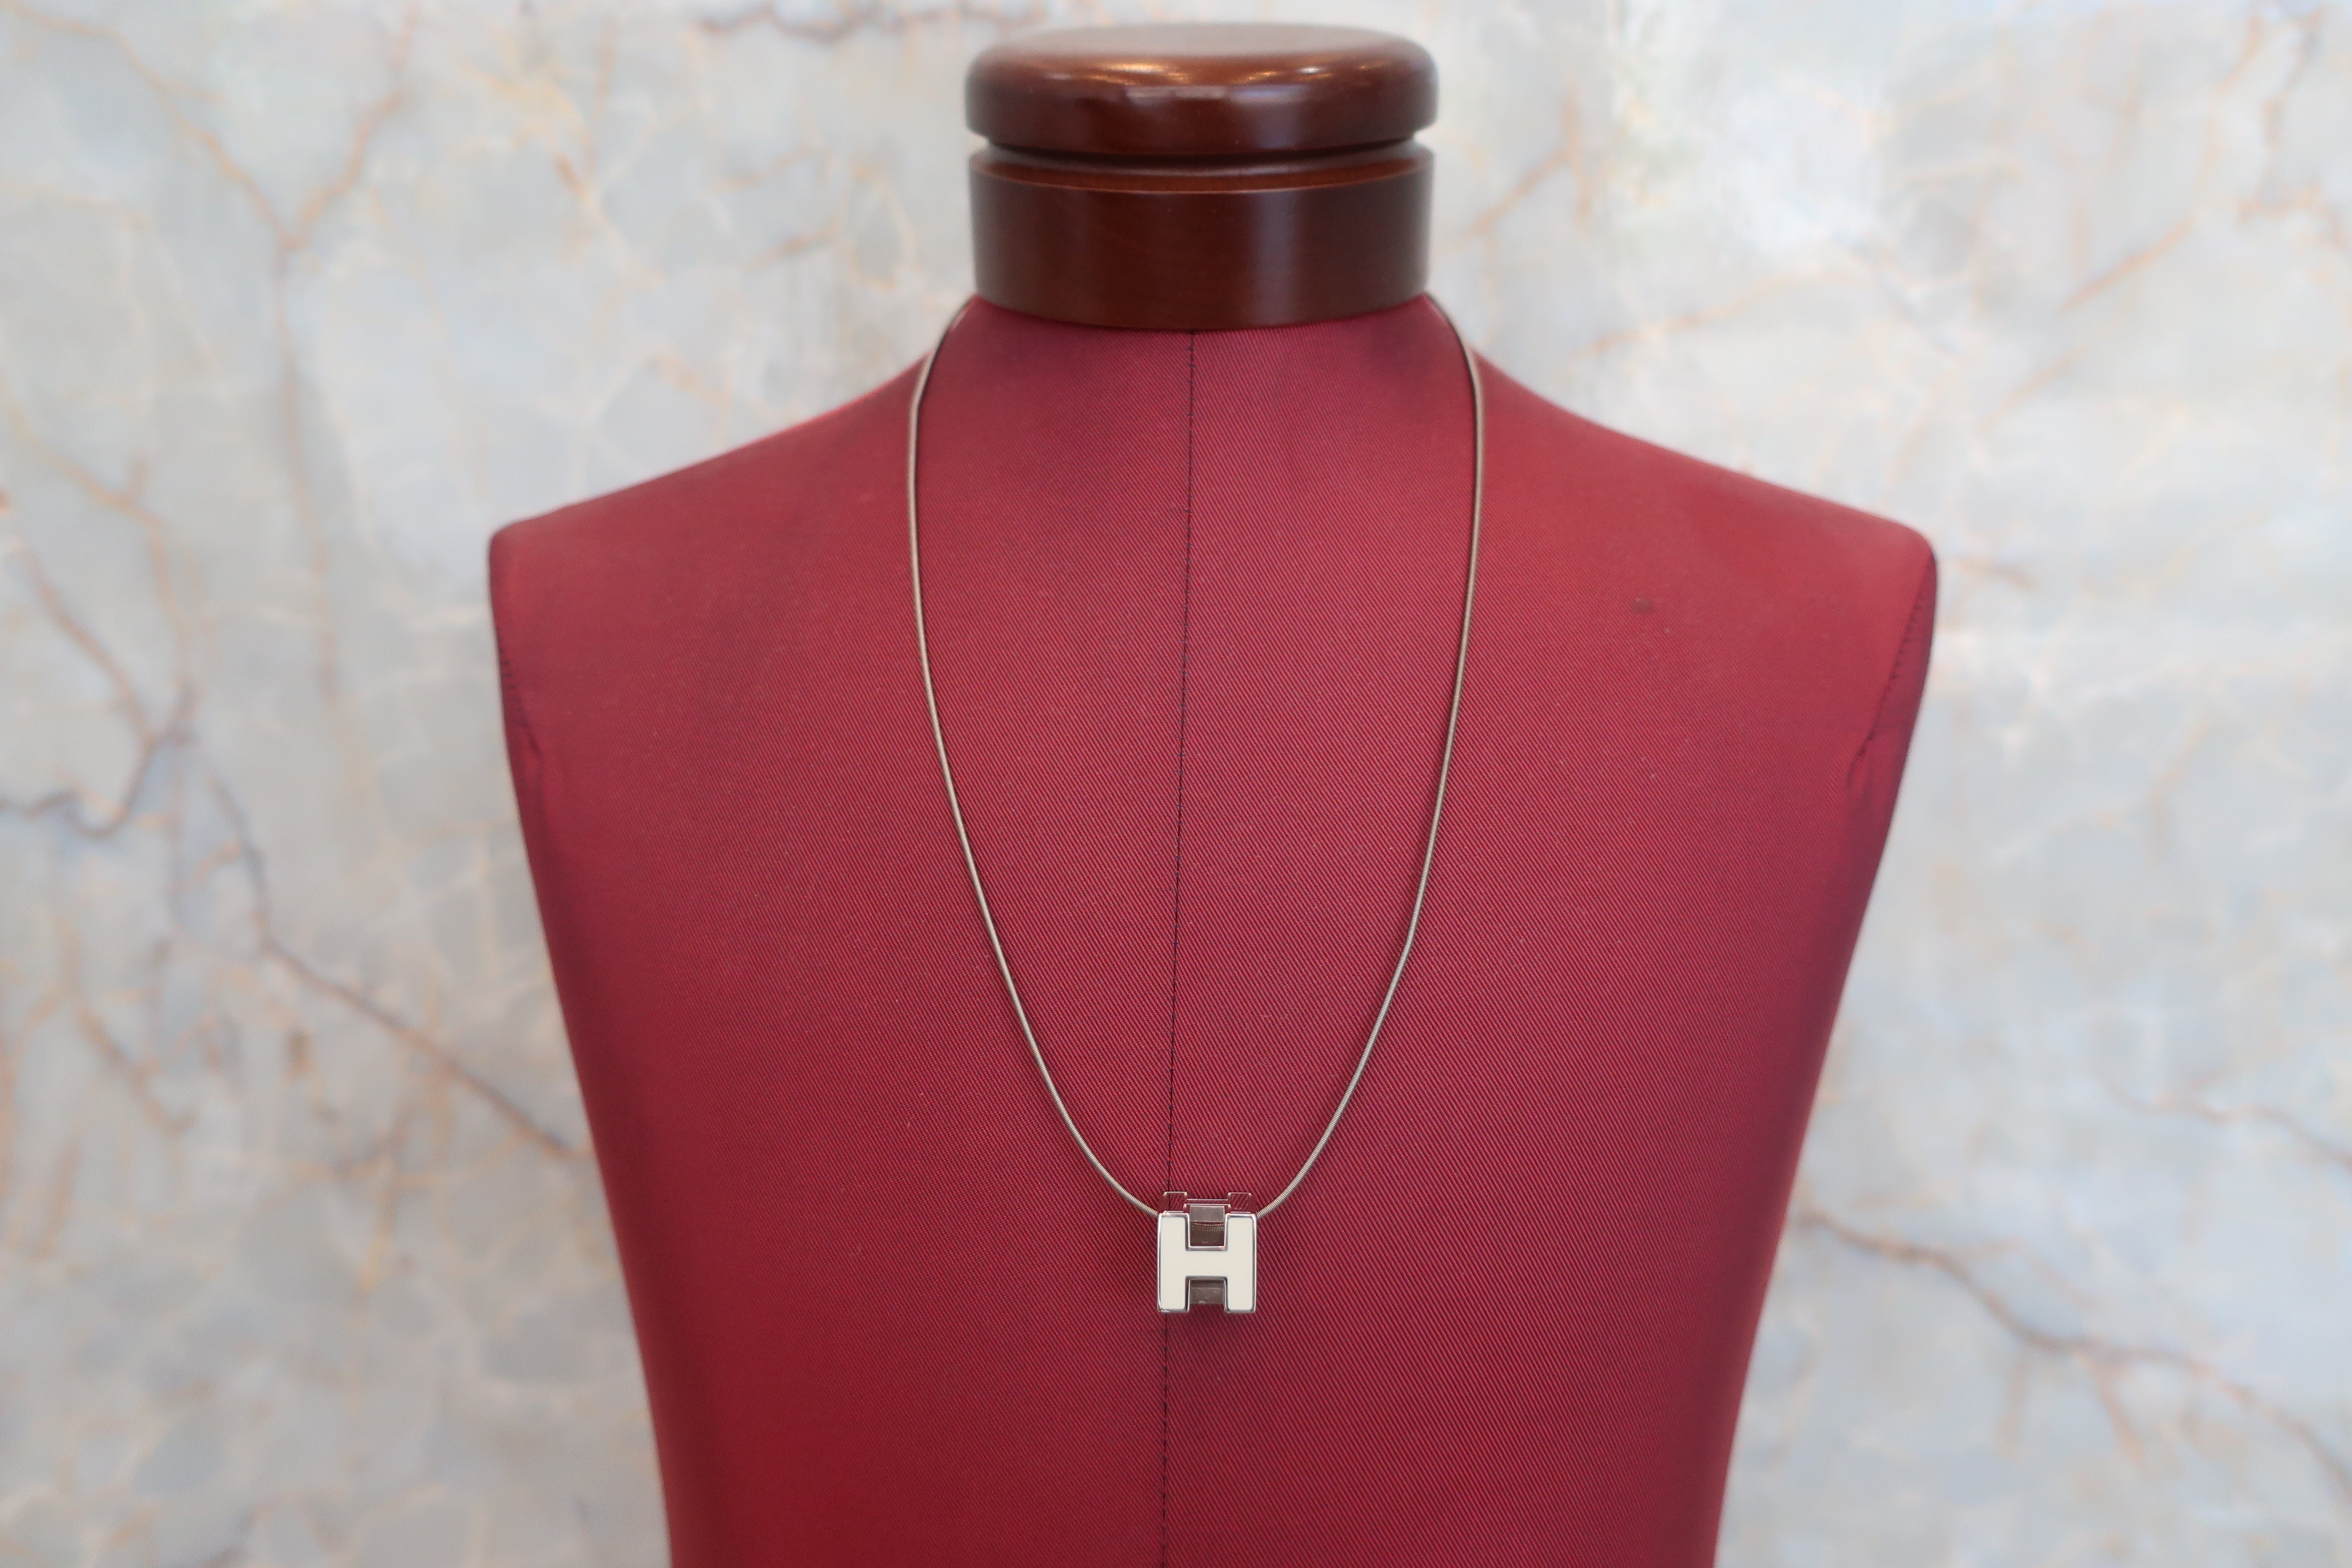 HERMES Chaine dancre MM Necklace Silver 925 90196407 | eBay